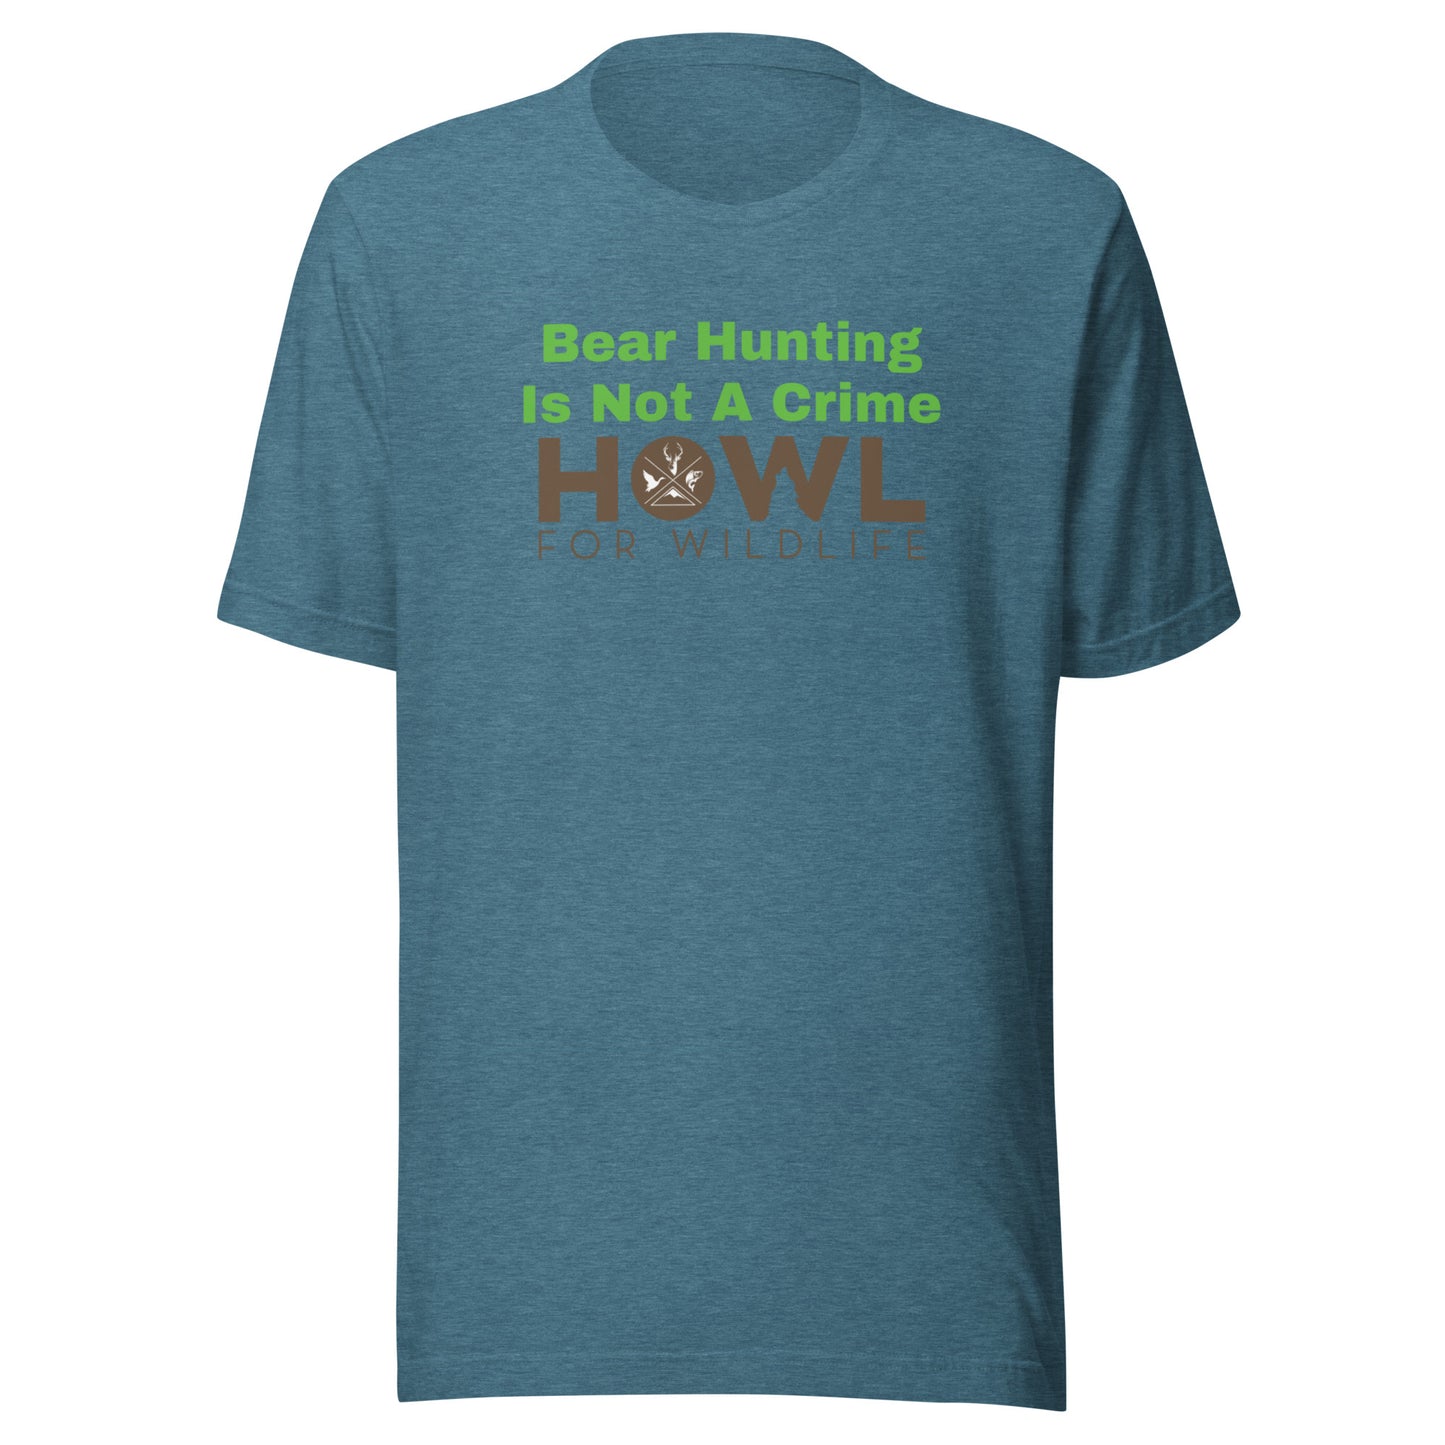 Bear Hunting Is Not a Crime - Unisex t-shirt